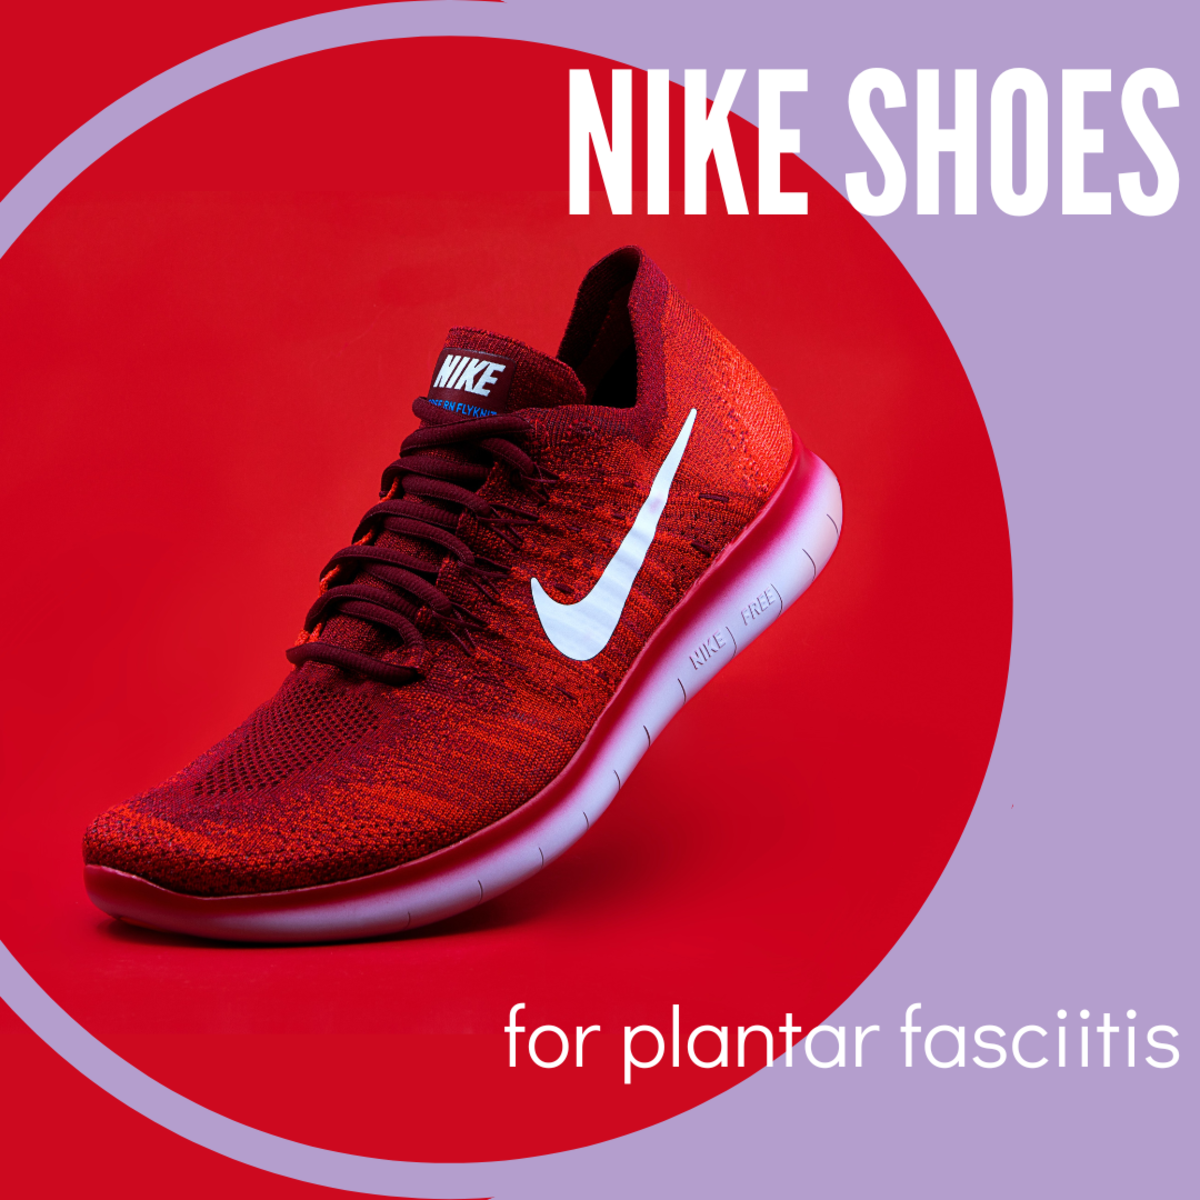 Can shoes eliminate plantar fasciitis? They did mine!